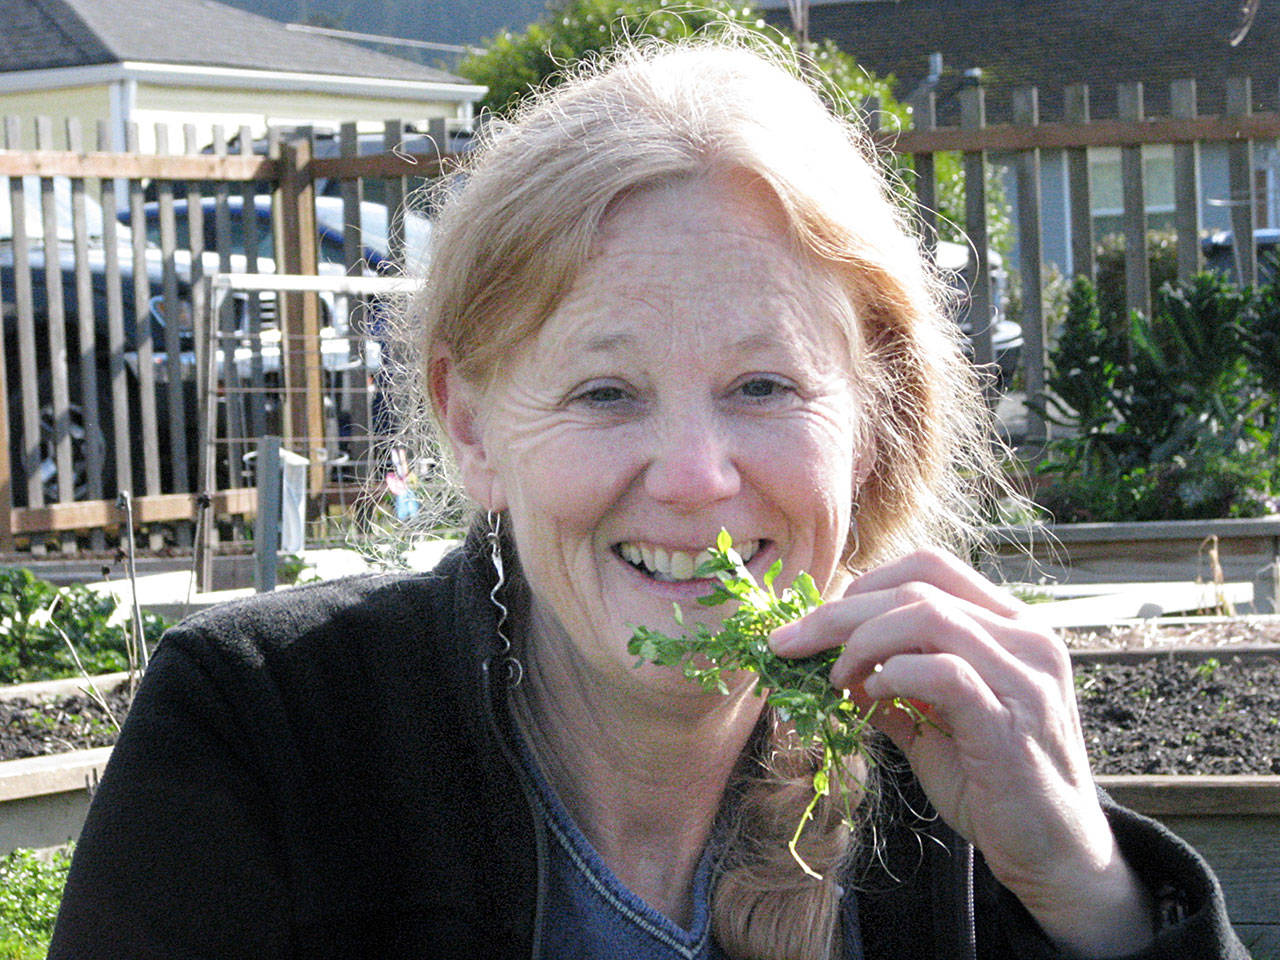 “Weedy Gastronomy – What to Eat, What to Avoid” will be presented by Clallam County Noxious Weed Control Coordinator Cathy Lucero at noon Thursday at the Clallam County Courthouse, 223 E. Fourth St., Port Angeles. (Amanda Rosenberg)